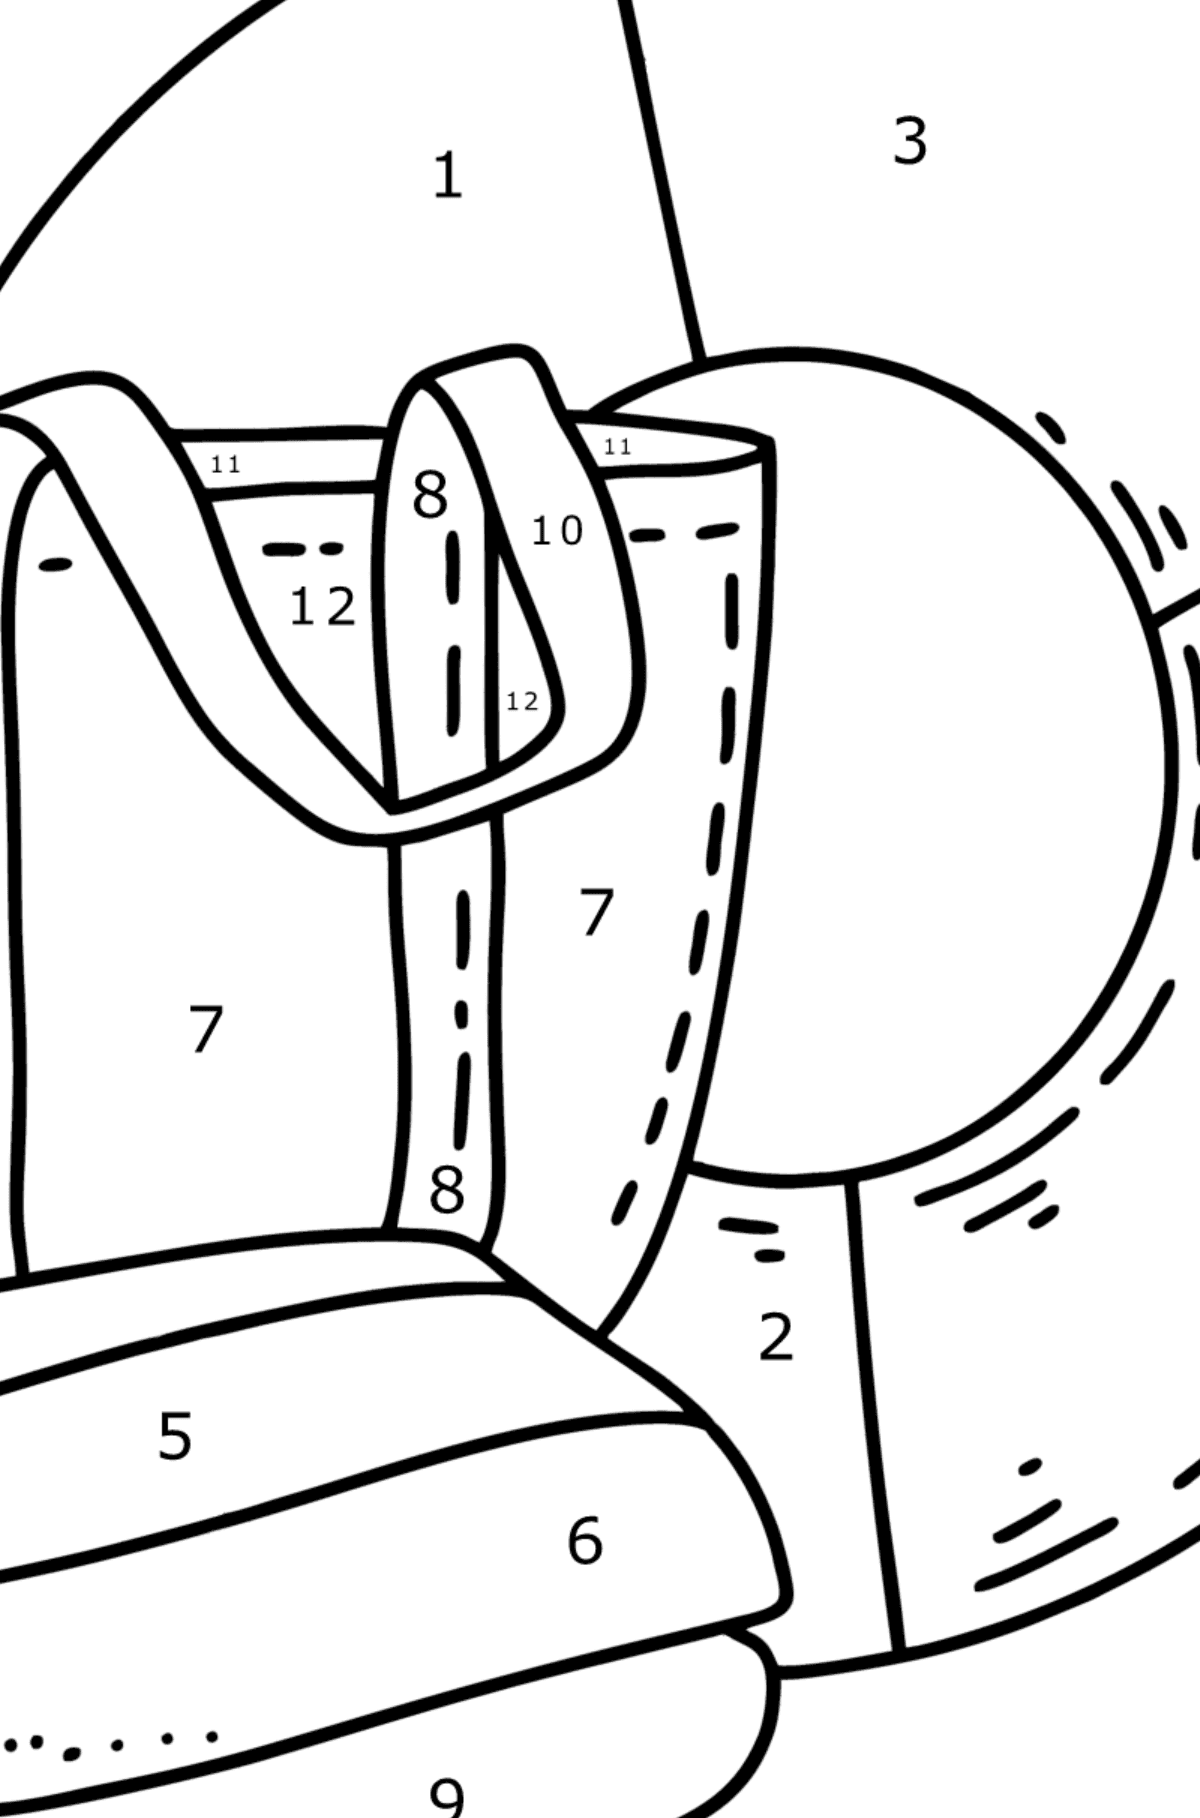 Coloring page Beach: bag and lifebuoy - Coloring by Numbers for Kids